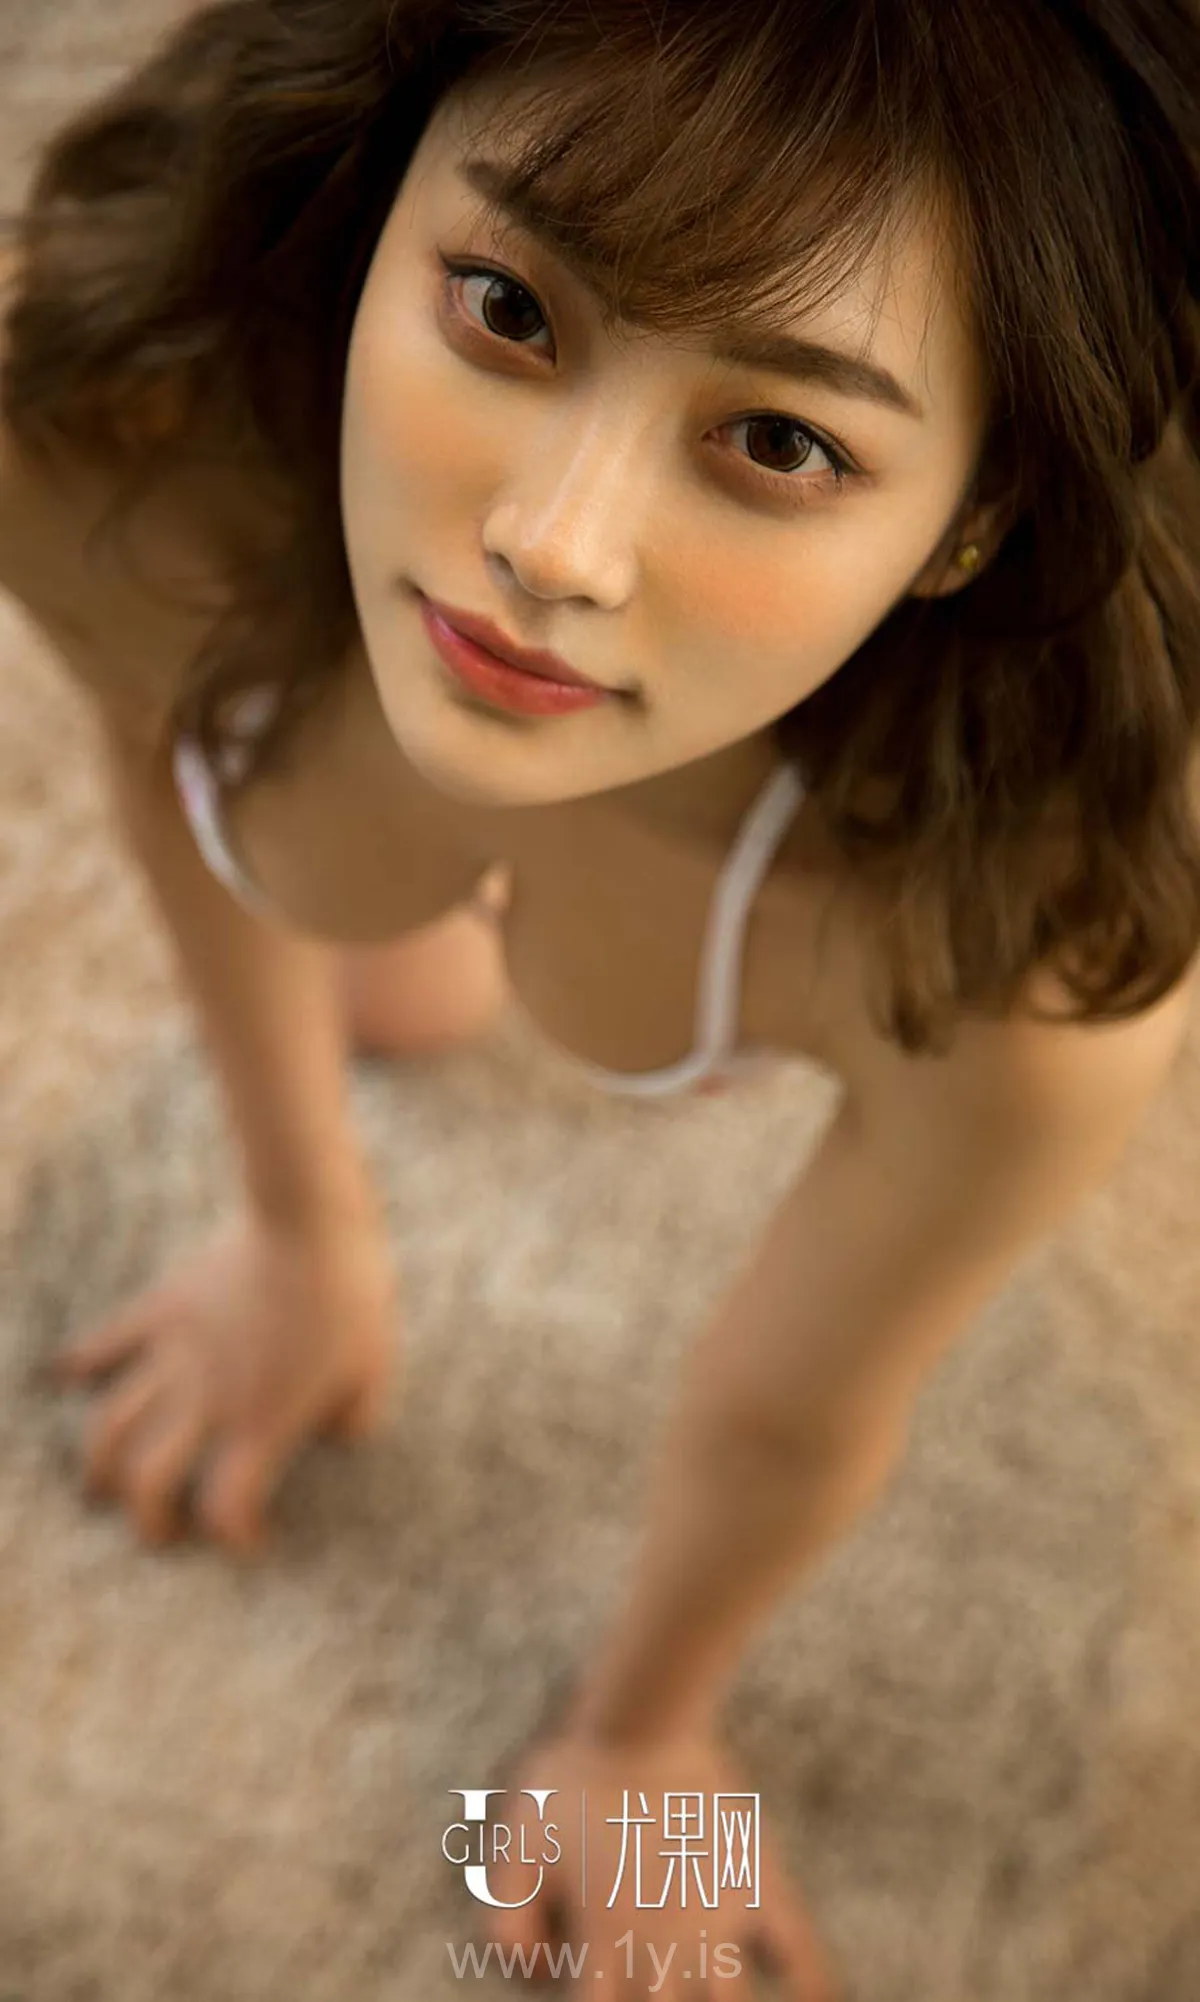 UGIRLS NO.1719 Lively & Gorgeous Chinese Cutie 晨间雨露杨晨晨